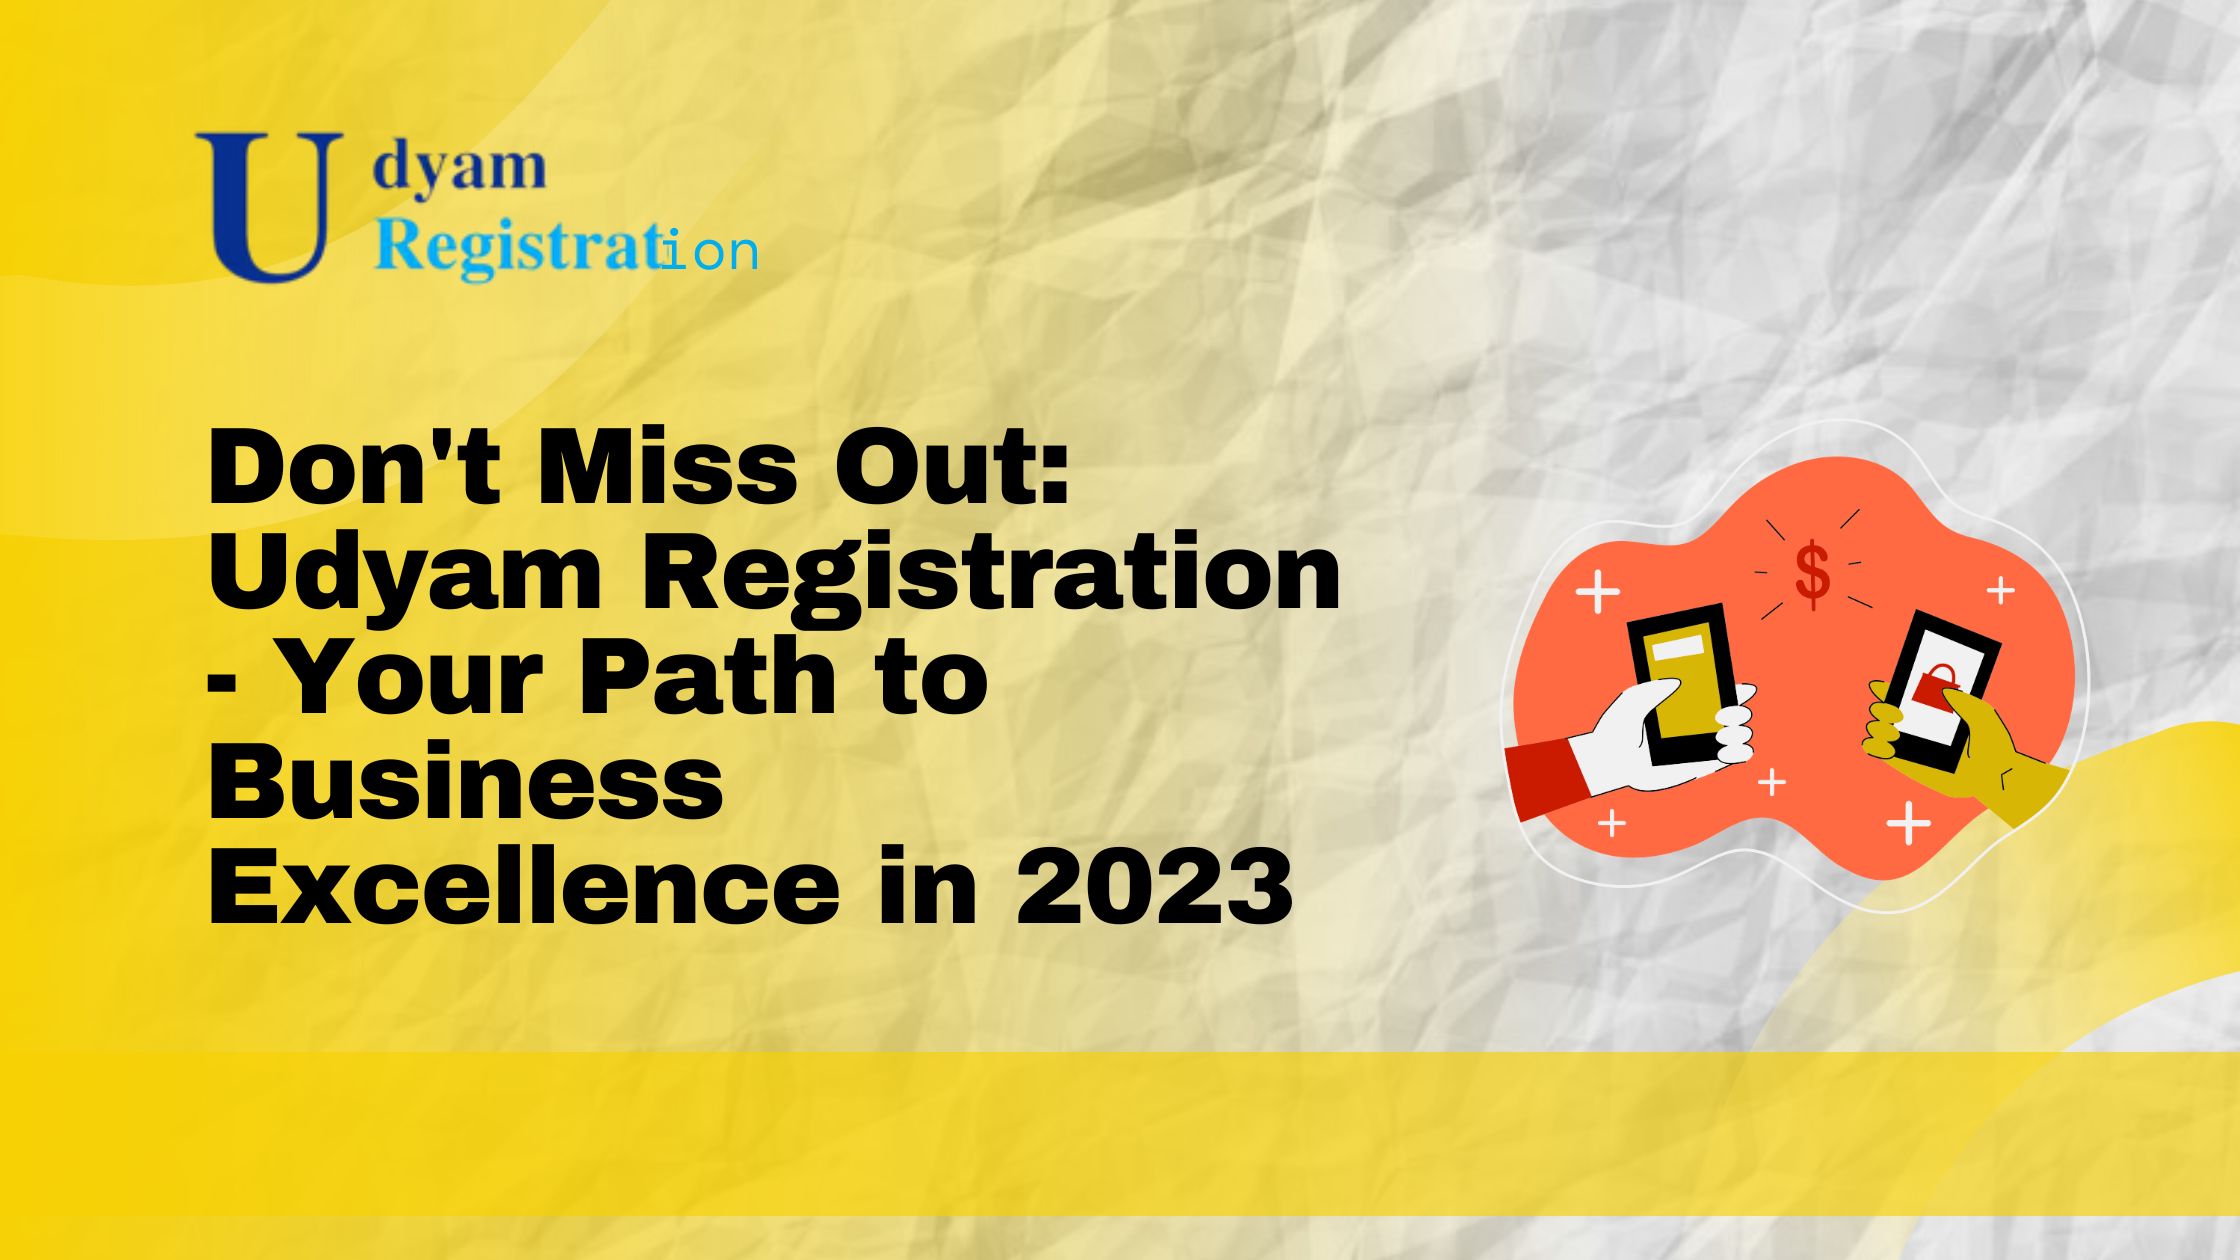 Don't Miss Out: Udyam Registration - Your Path to Business Excellence in 2023